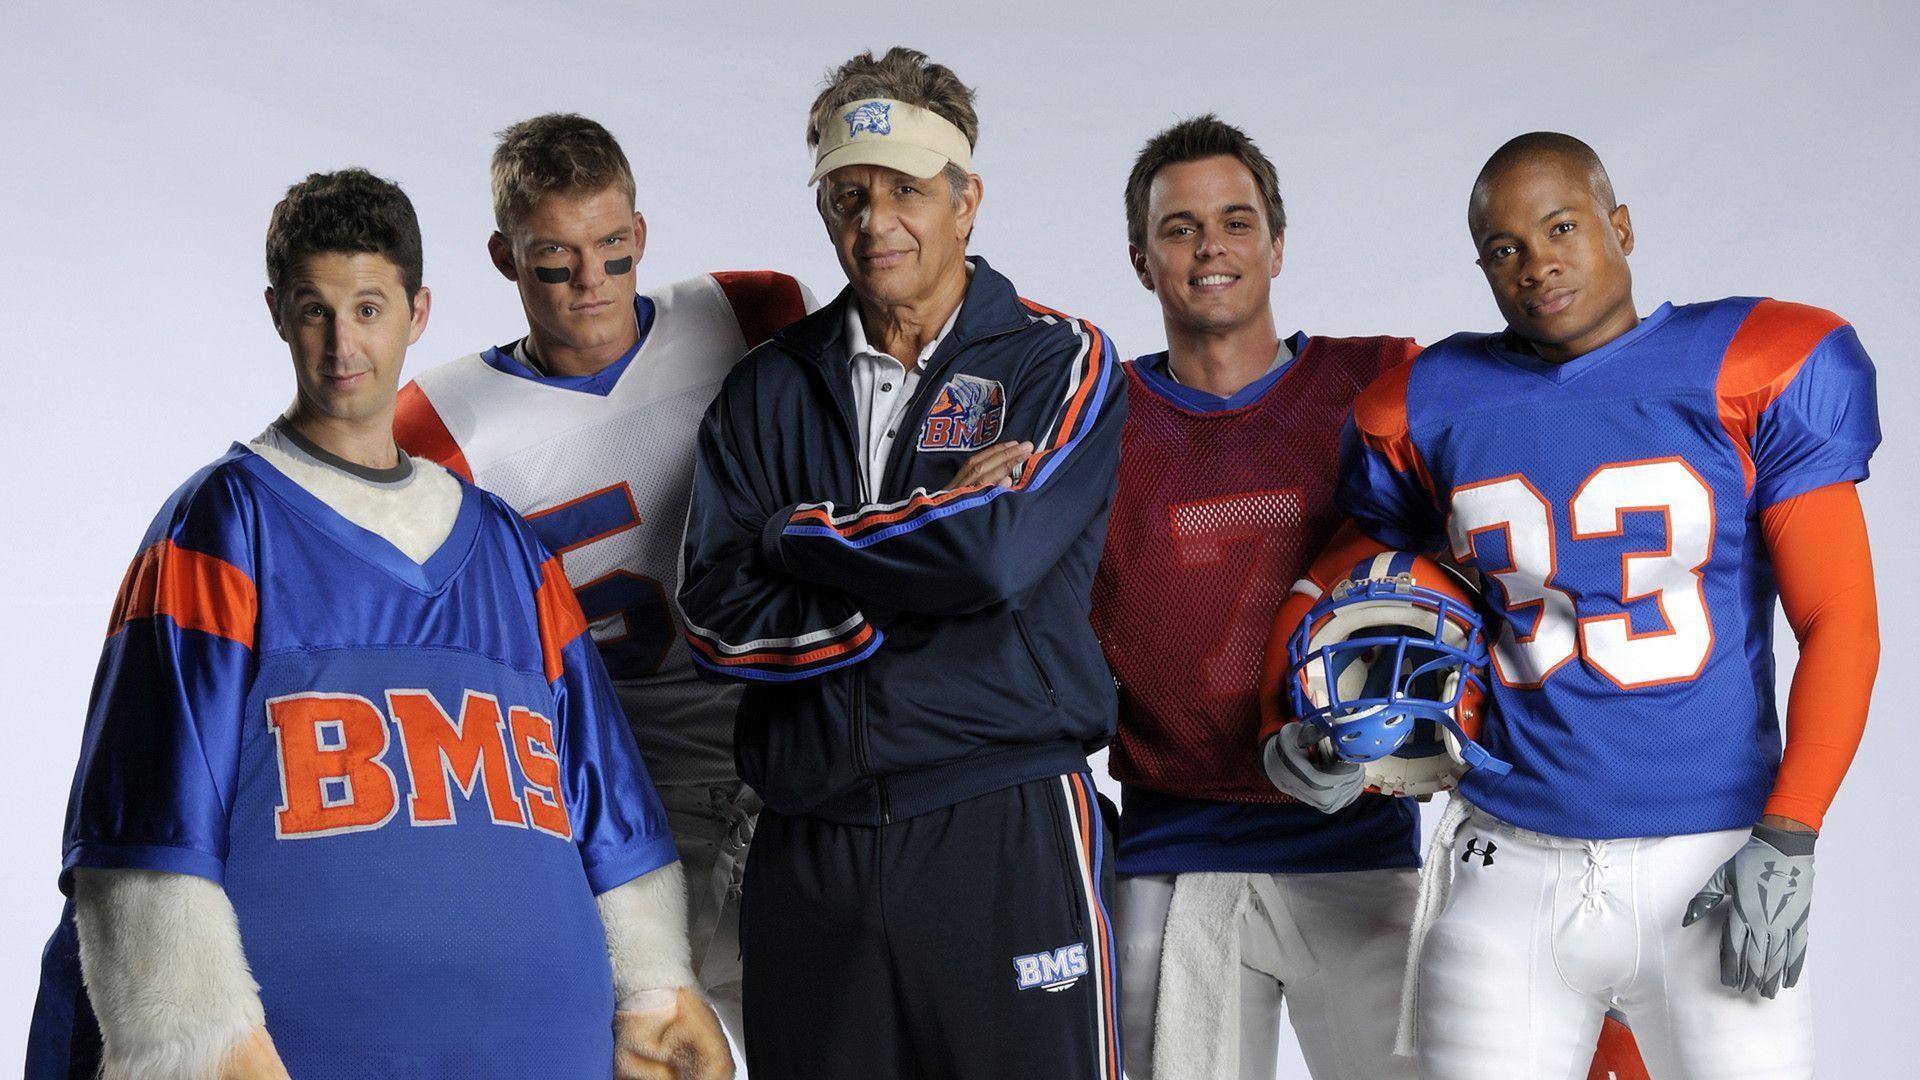 Blue Mountain State Season 2 Episode Guide and Schedule: Track your